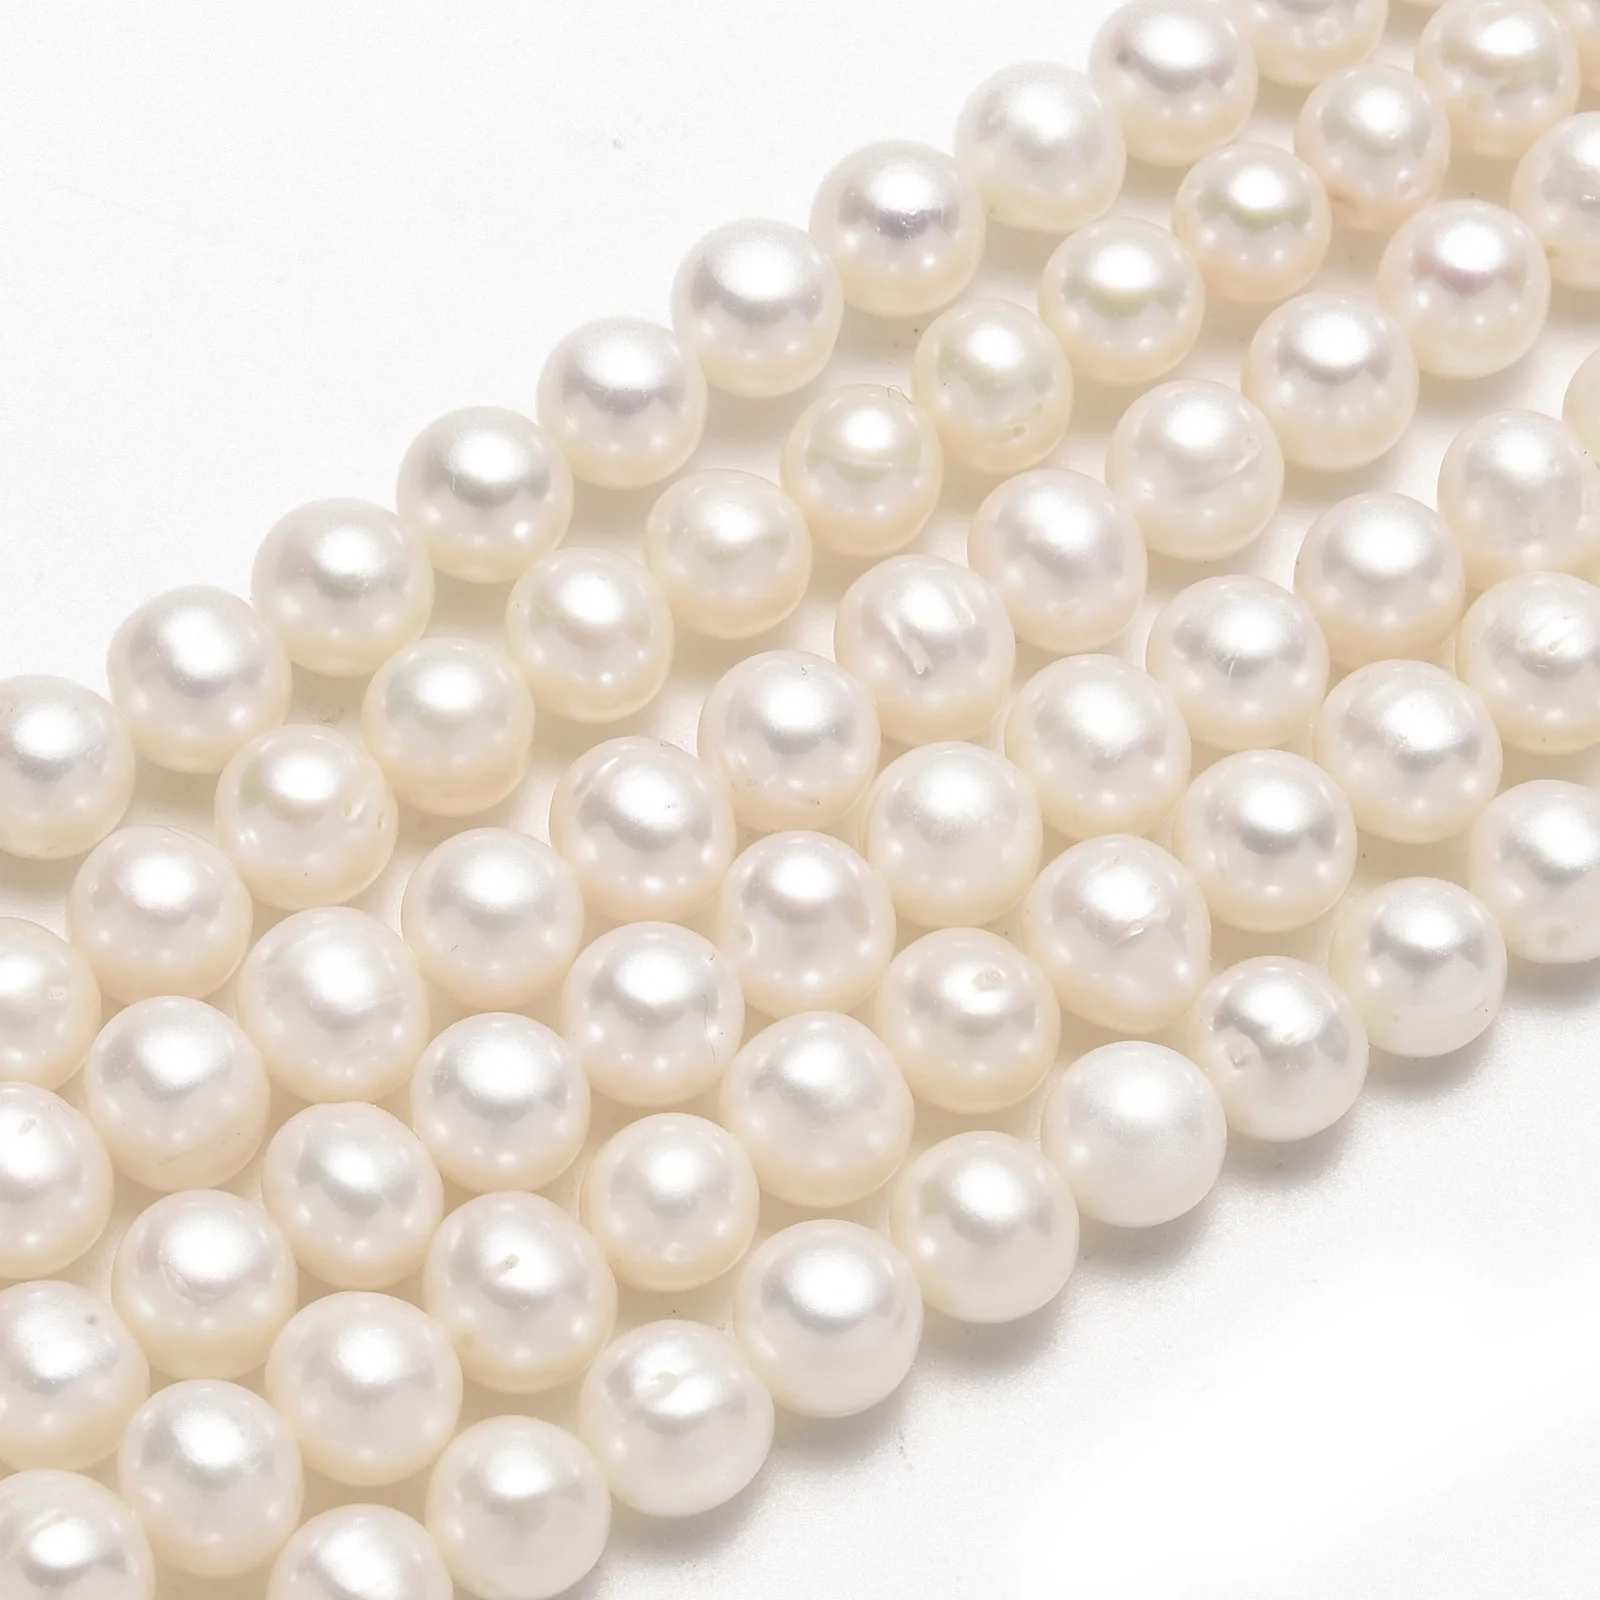 

3~10mm Natural Cultured Freshwater Pearl Beads Grade A Loose Beads Potato Shape White Color For Necklace Bracelet Jewelry Making